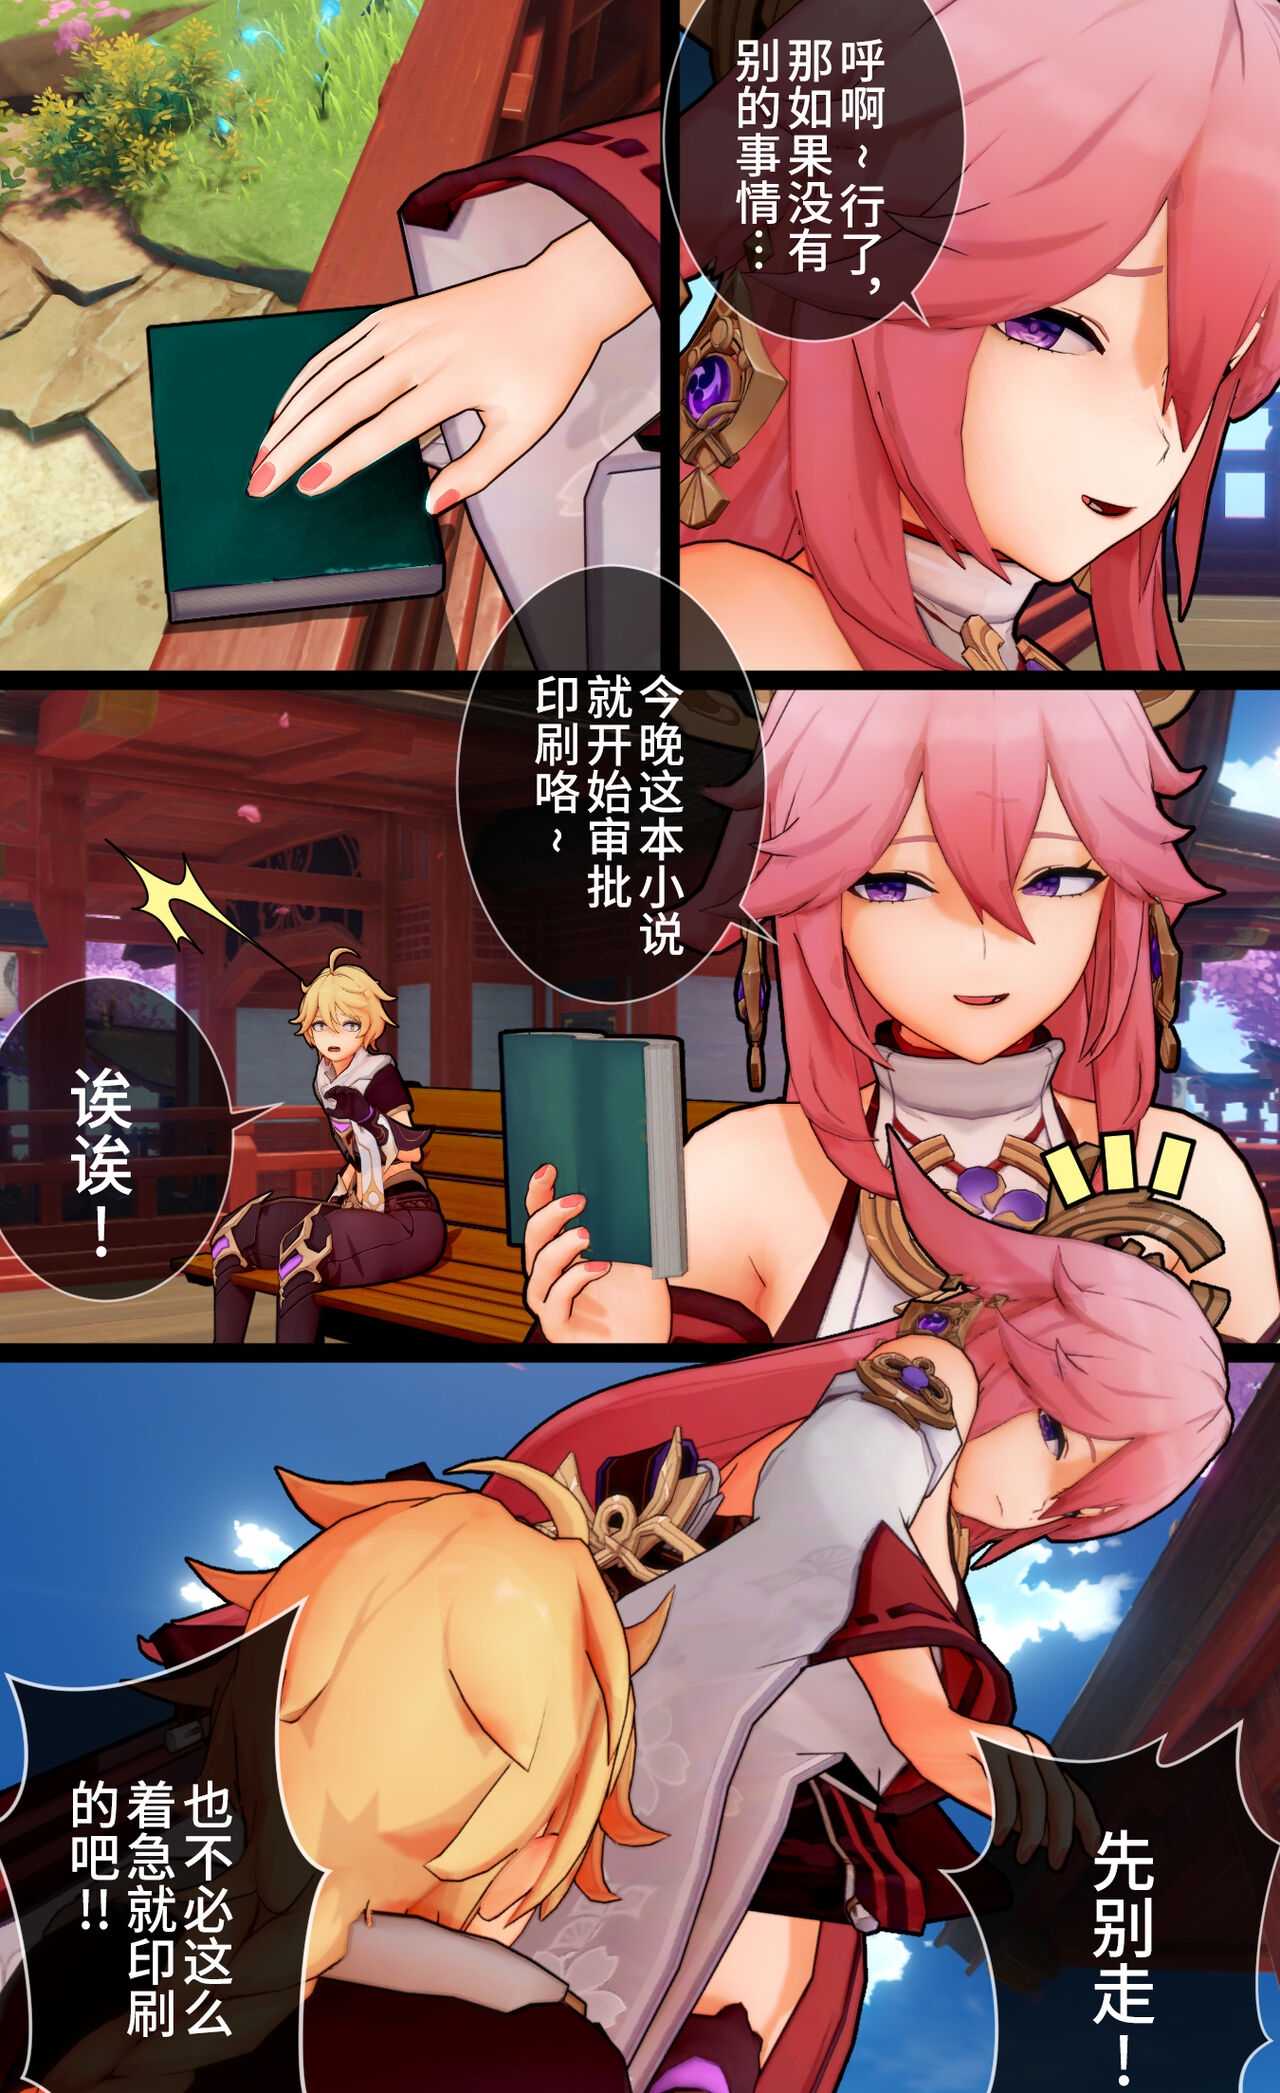 [ActualE] The Vixen And Its Pup (Genshin Impact) [Chinese] [黎欧出资汉化] [Decensored] 8